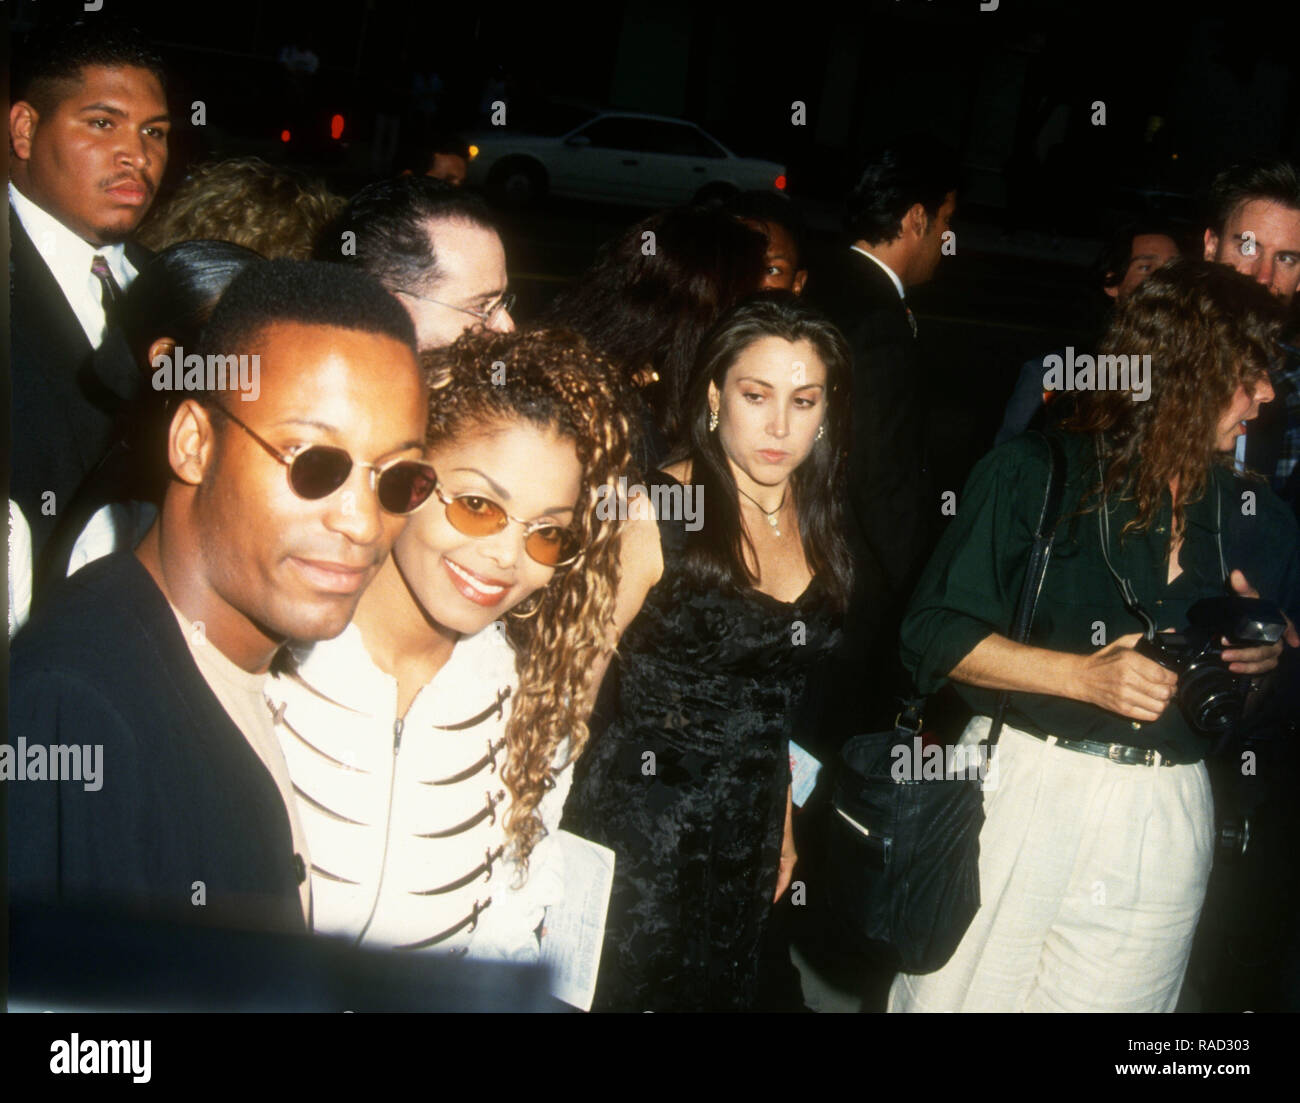 BEVERLY HILLS, CA - JULY 21: Director/writer/producer John Singleton and singer Janet Jackson attend Columbia Pictures' 'Poetic Justice' Premiere on July 21, 1993 at the Samuel Goldwyn Theatre in Beverly Hills, California. Photo by Barry King/Alamy Stock Photo Stock Photo